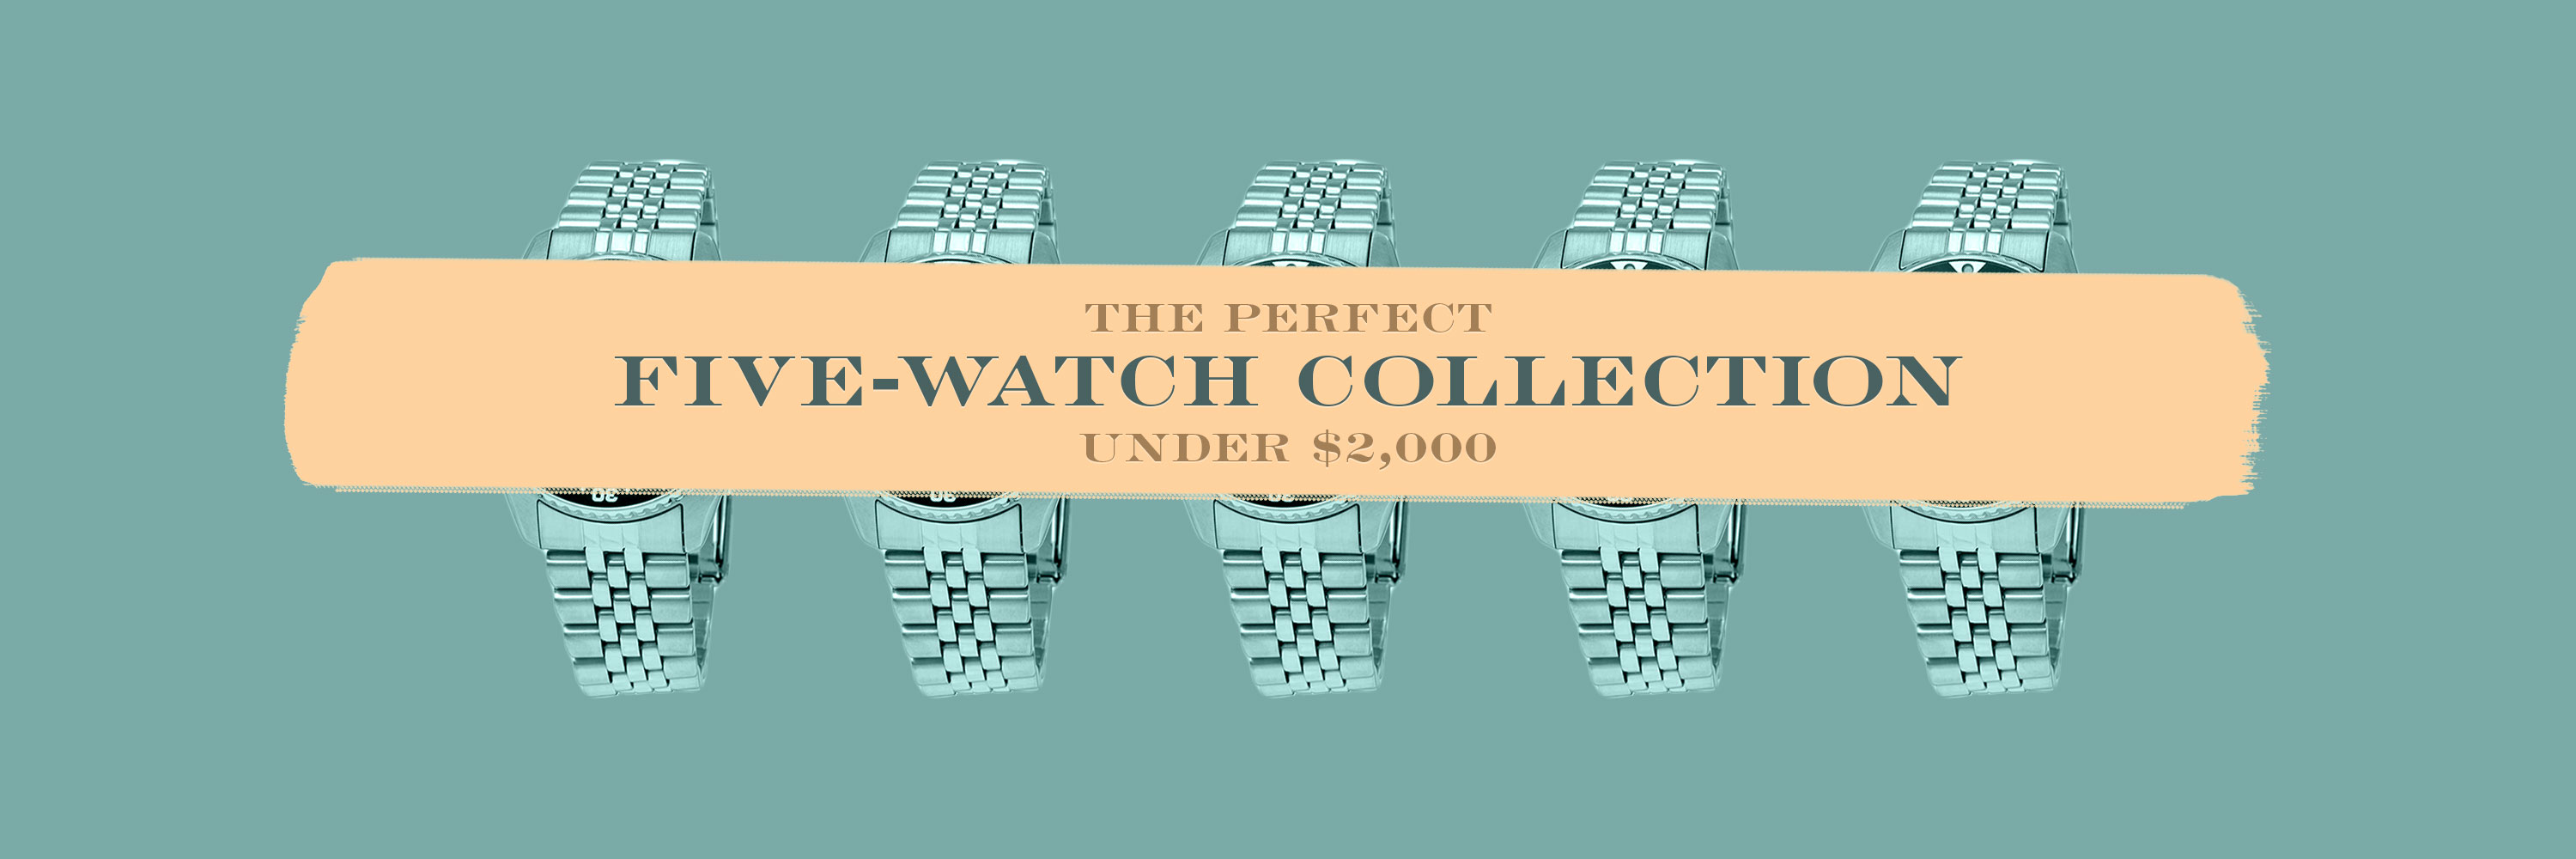 Want To Build The Perfect Five-Watch Collection For Under $2,000? These Are Our Picks